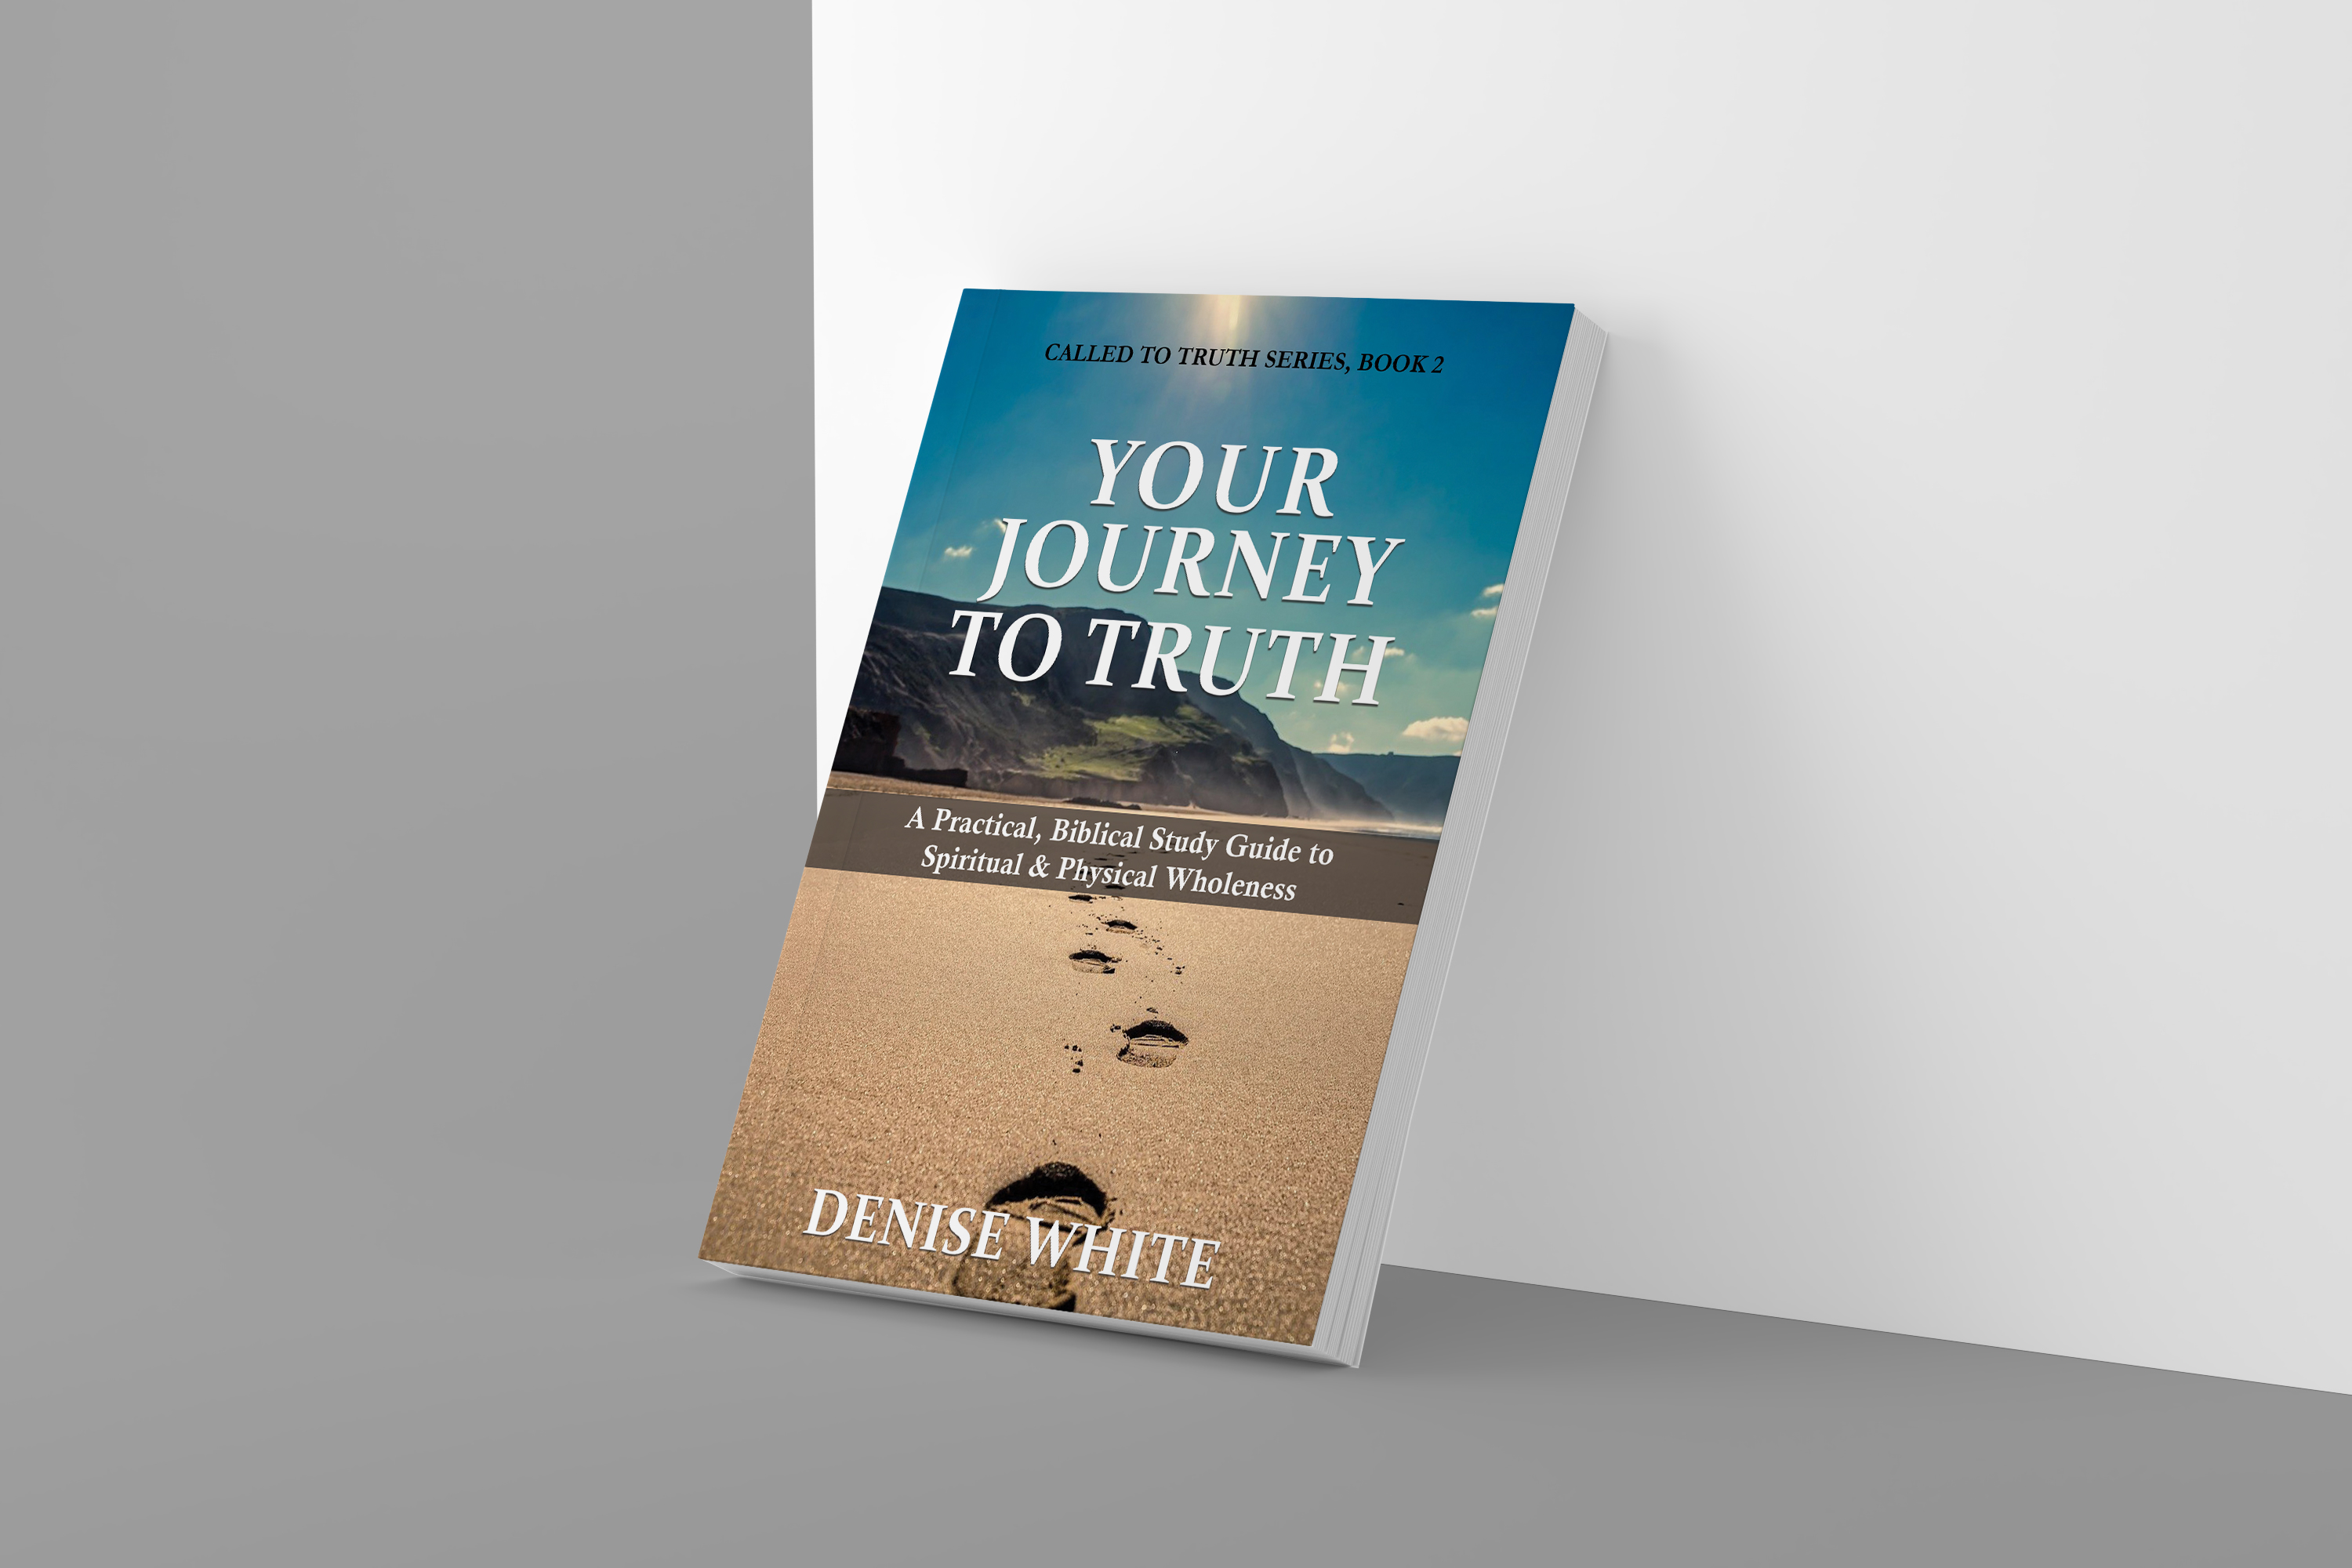 A Teacher of Biblical Principles Explains the Practical Steps to Spiritual and Physical Wholeness In Her New Book "Your Journey To Truth"